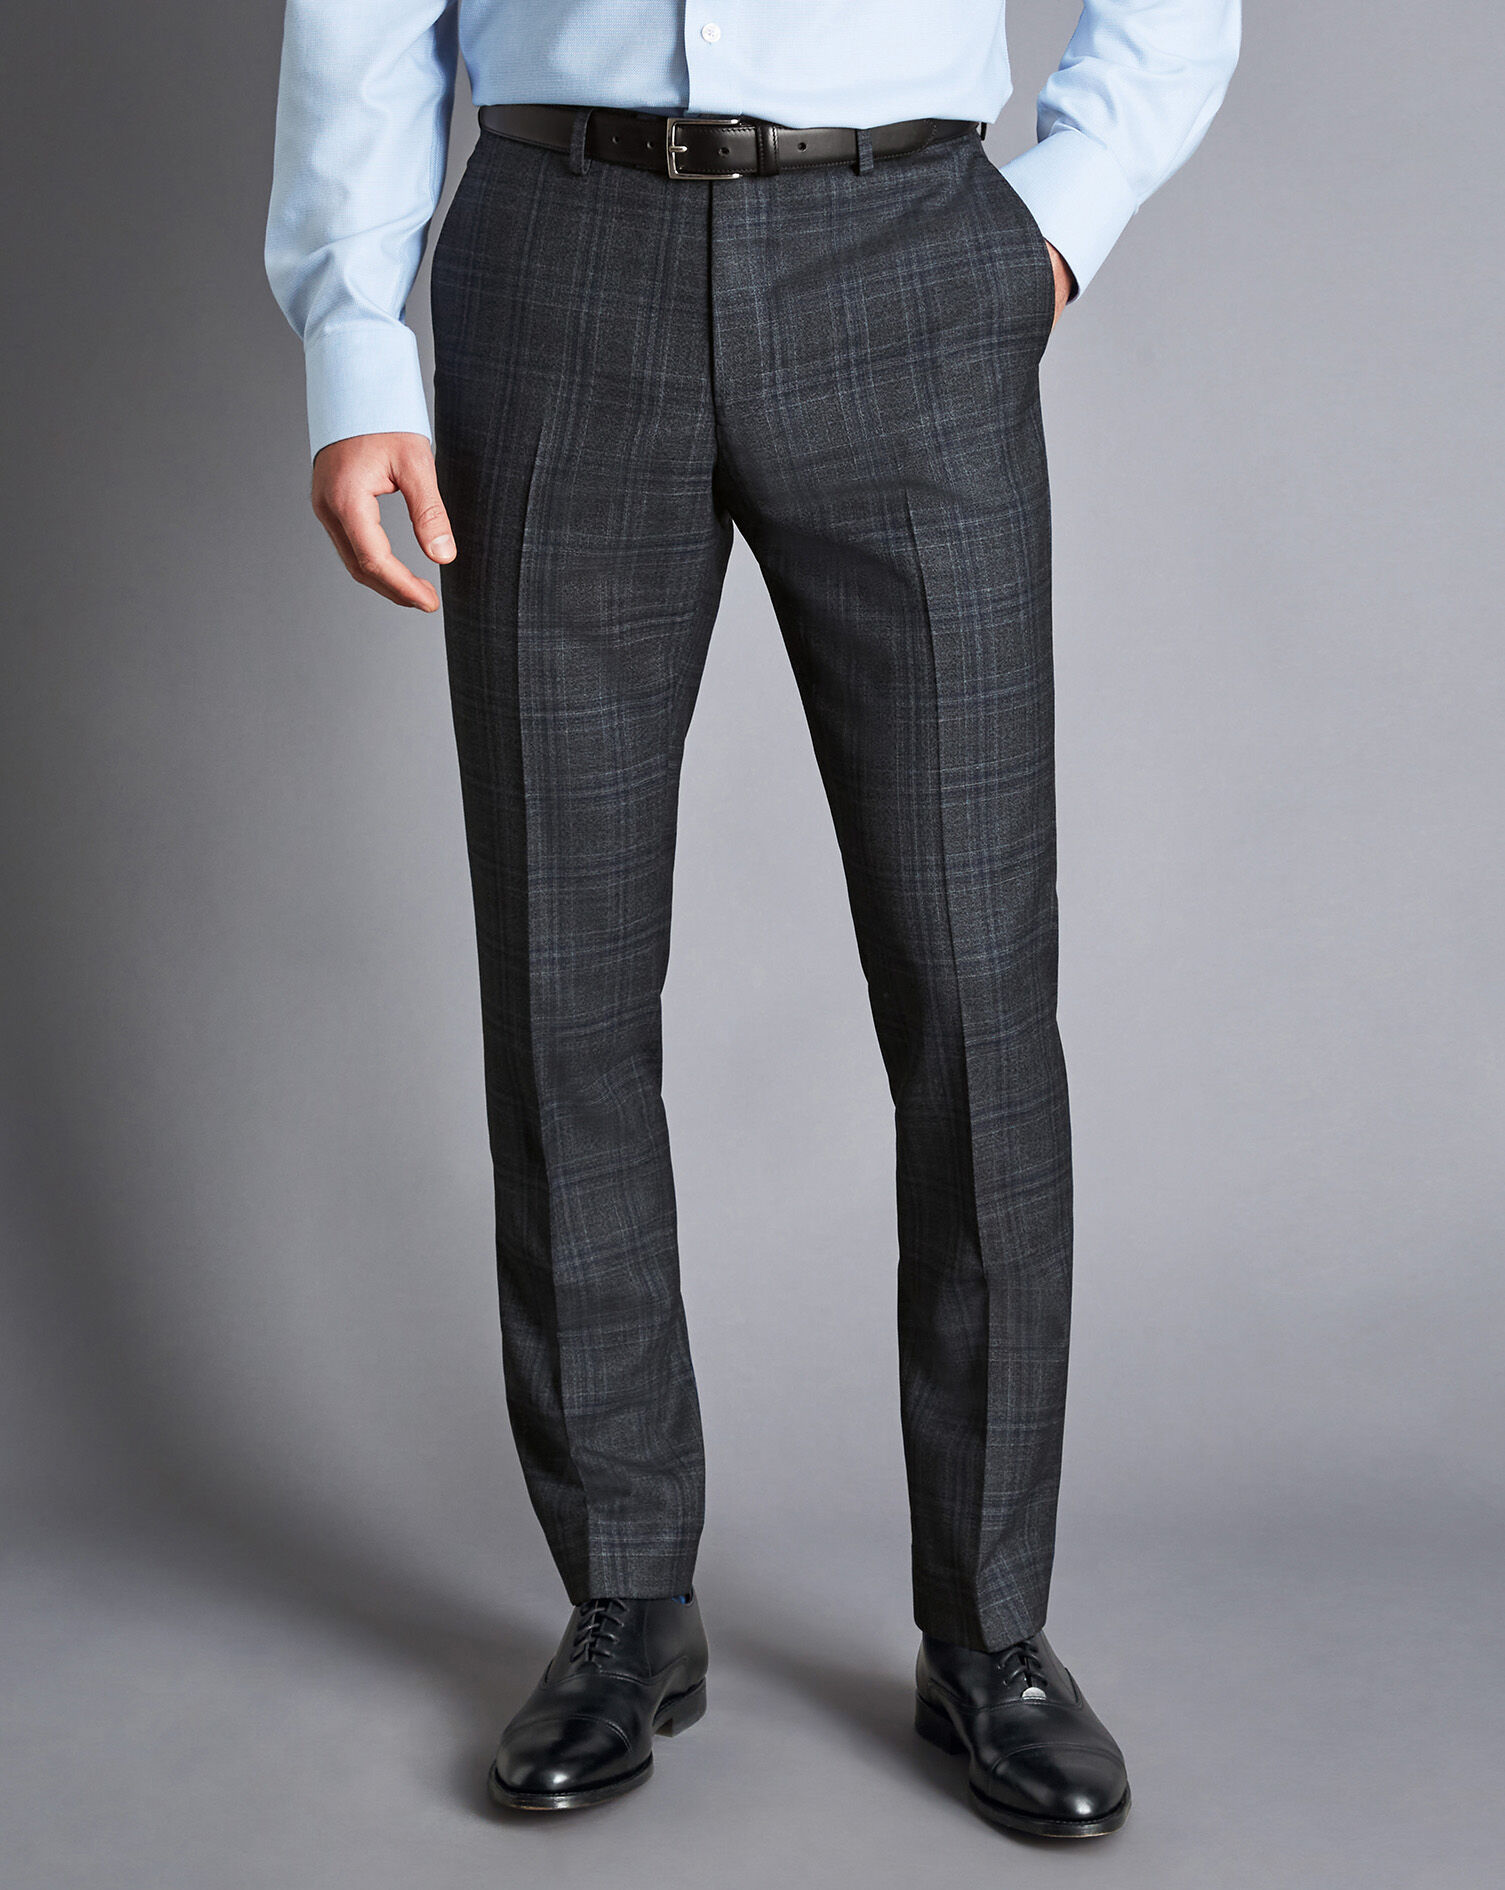 Check Trouser | Charcoal Grey Prince Of Wales Trouser – Modshopping Clothing